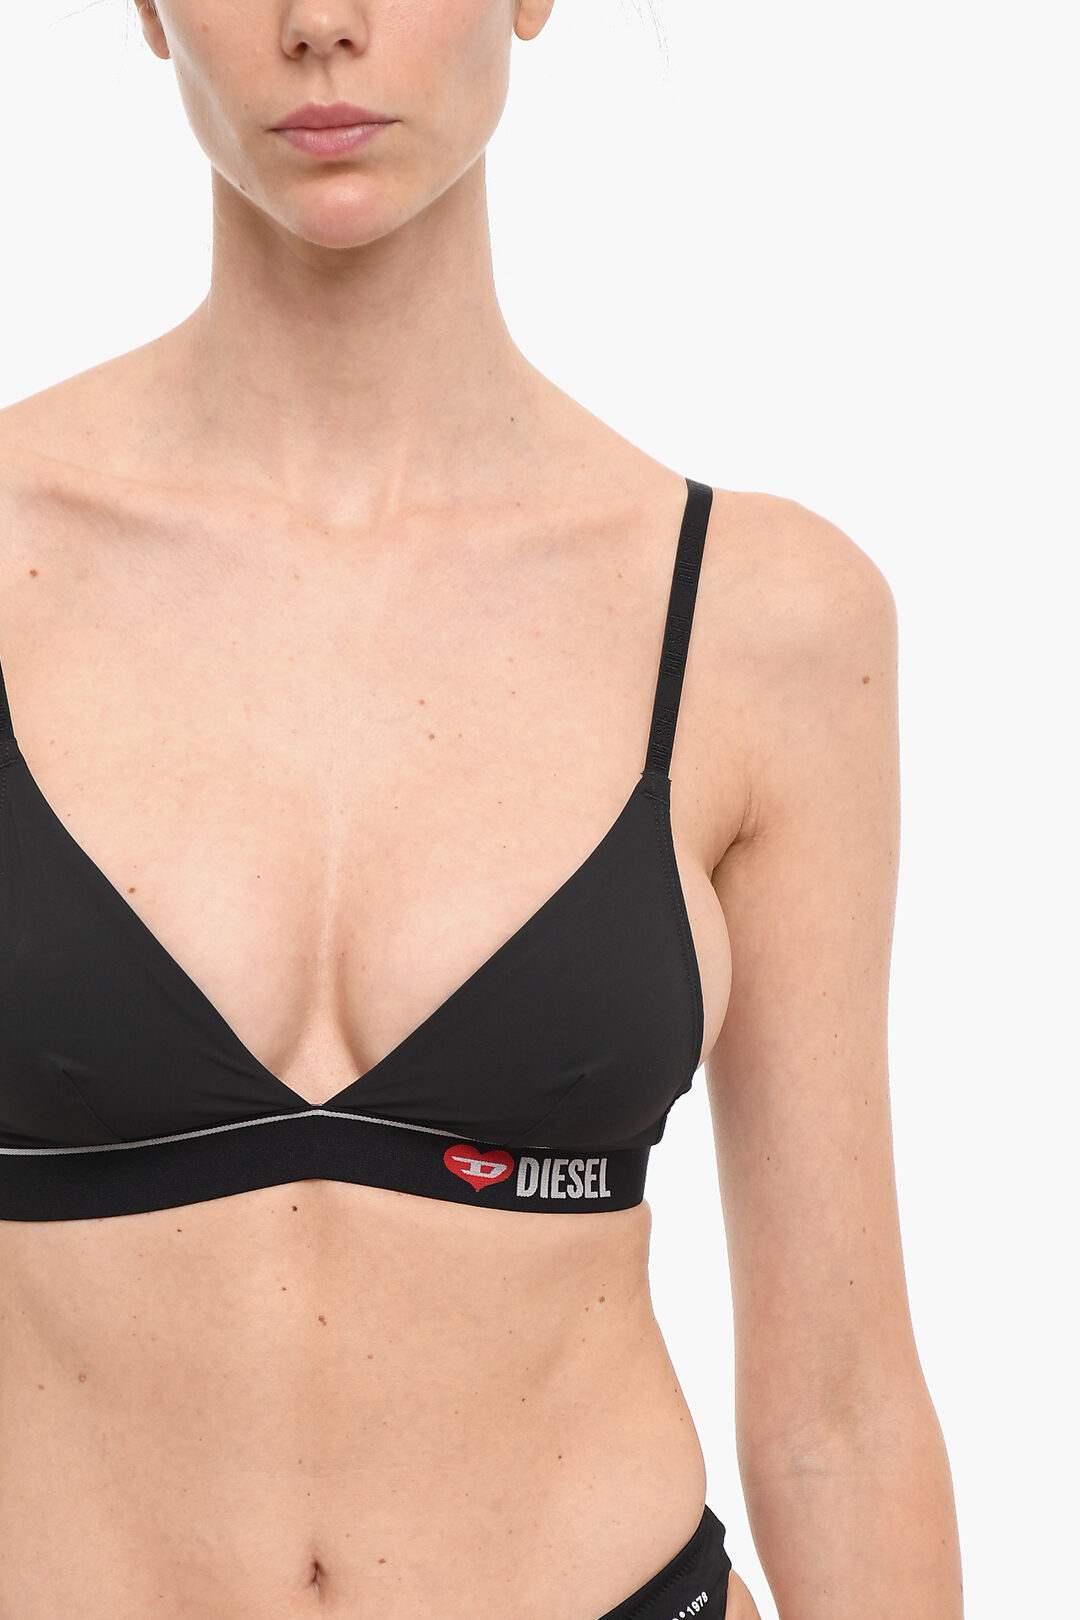 https://data.glamood.com/imgprodotto/solid-color-lizzys-triangle-bra-with-logoed-elastic-band_1366785_zoom.jpg